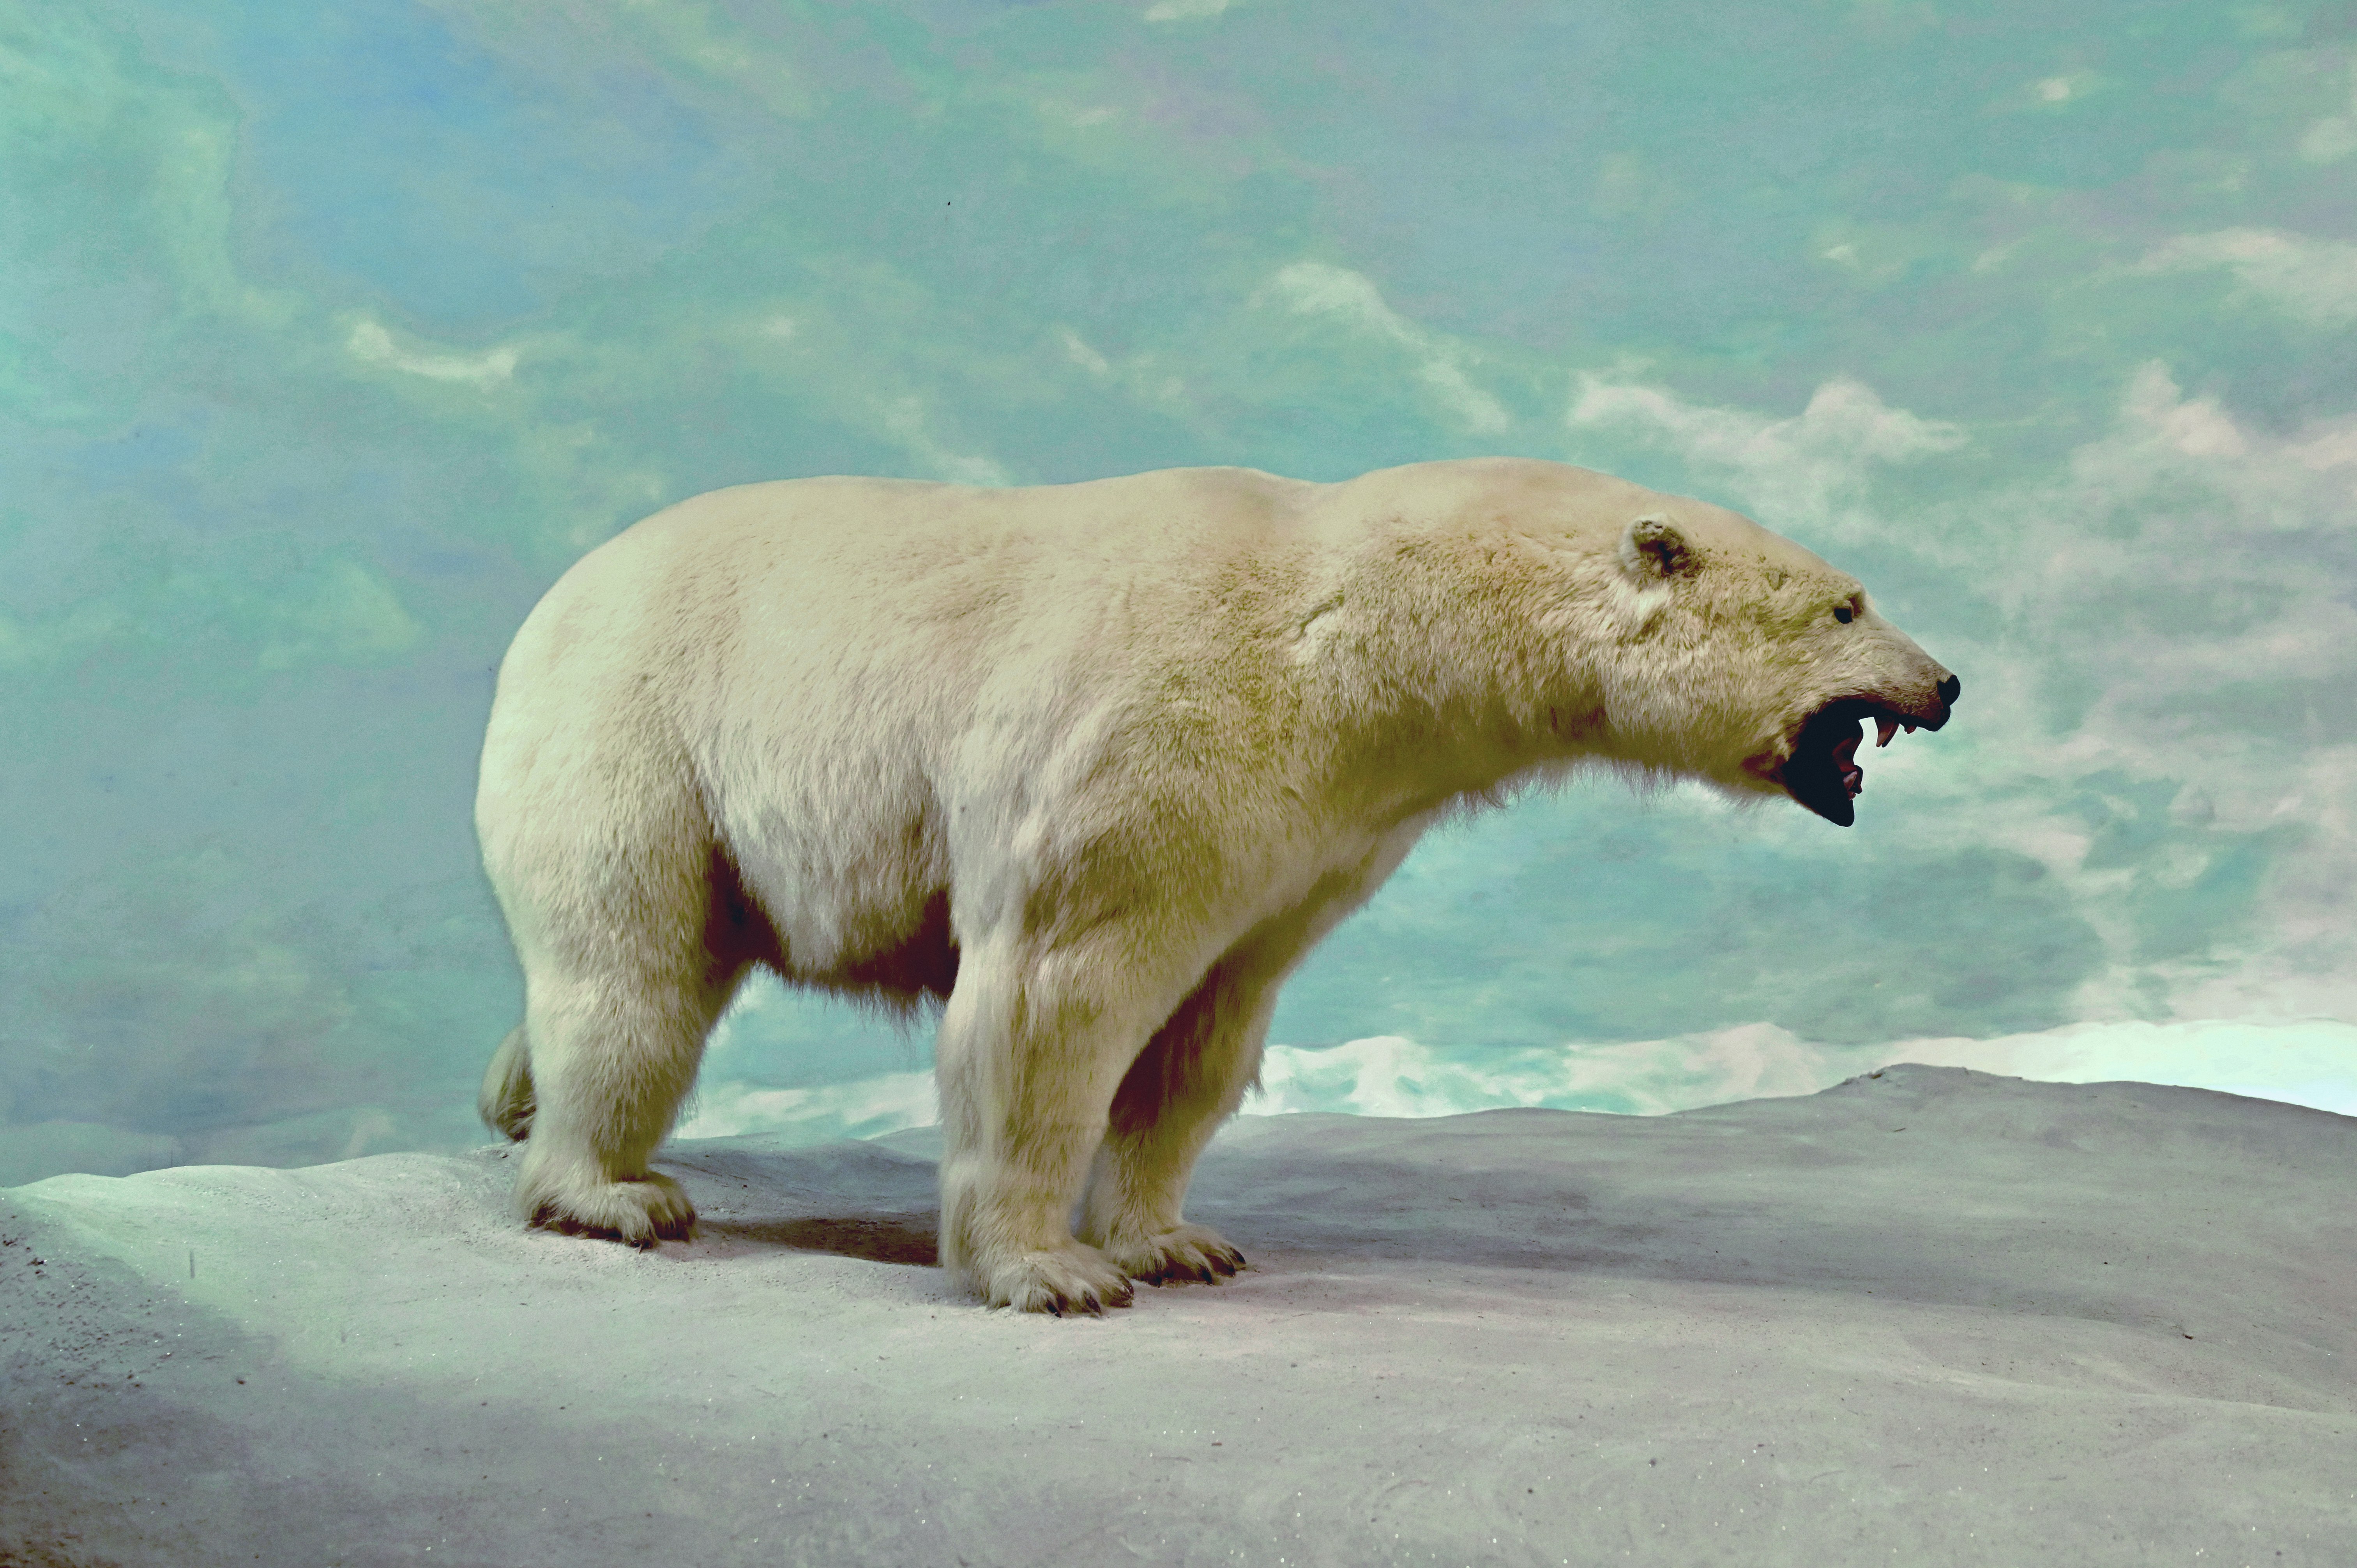 Polar bear diorama inside Museum of natural history in Mexico City